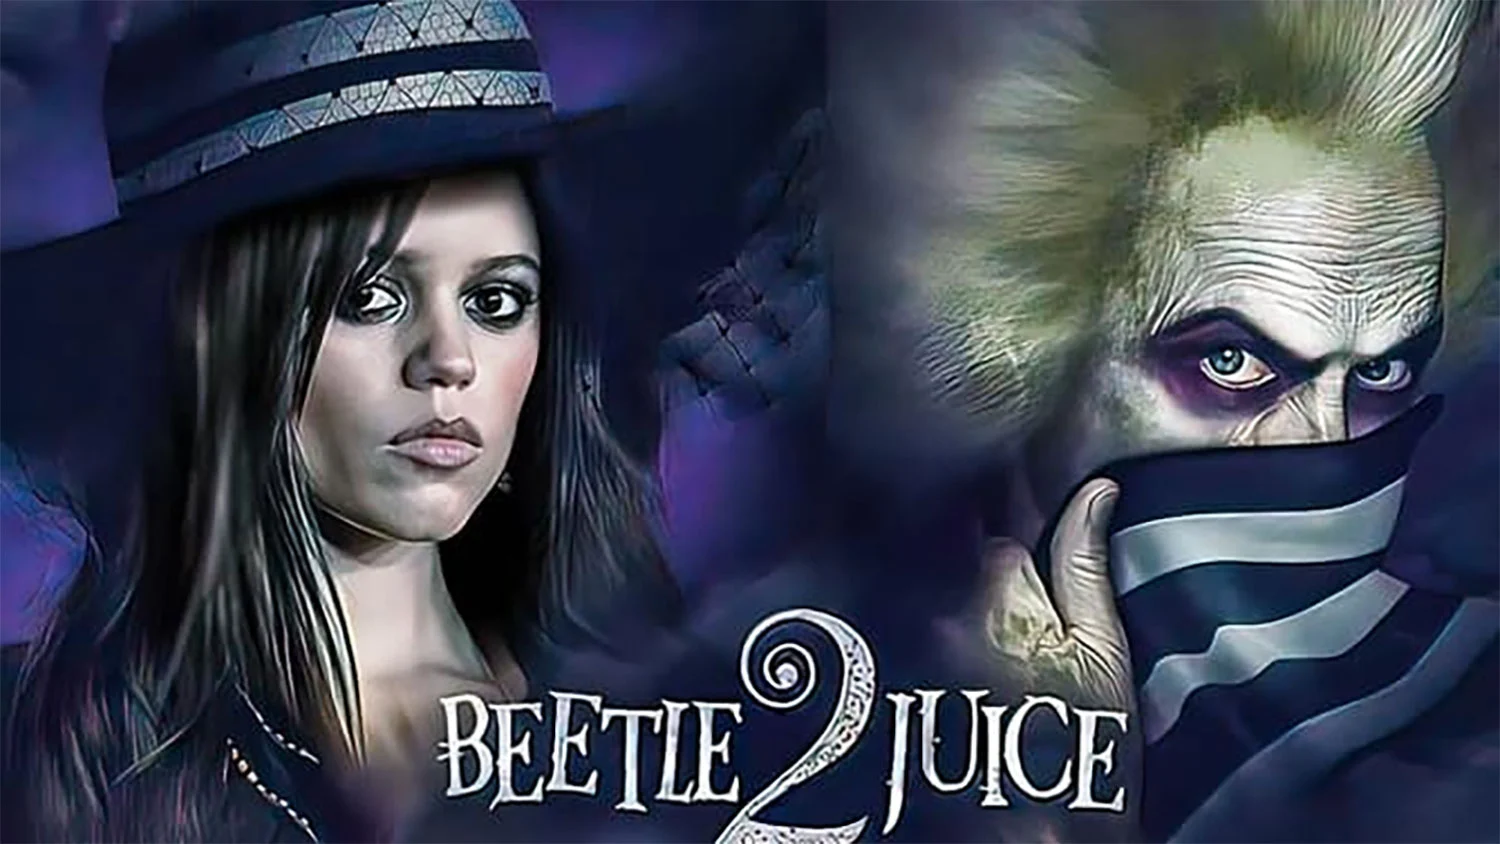 2024: A Year of Thrills and Chills in Horror Cinema - Beetlejuice 2 - Sept 6th